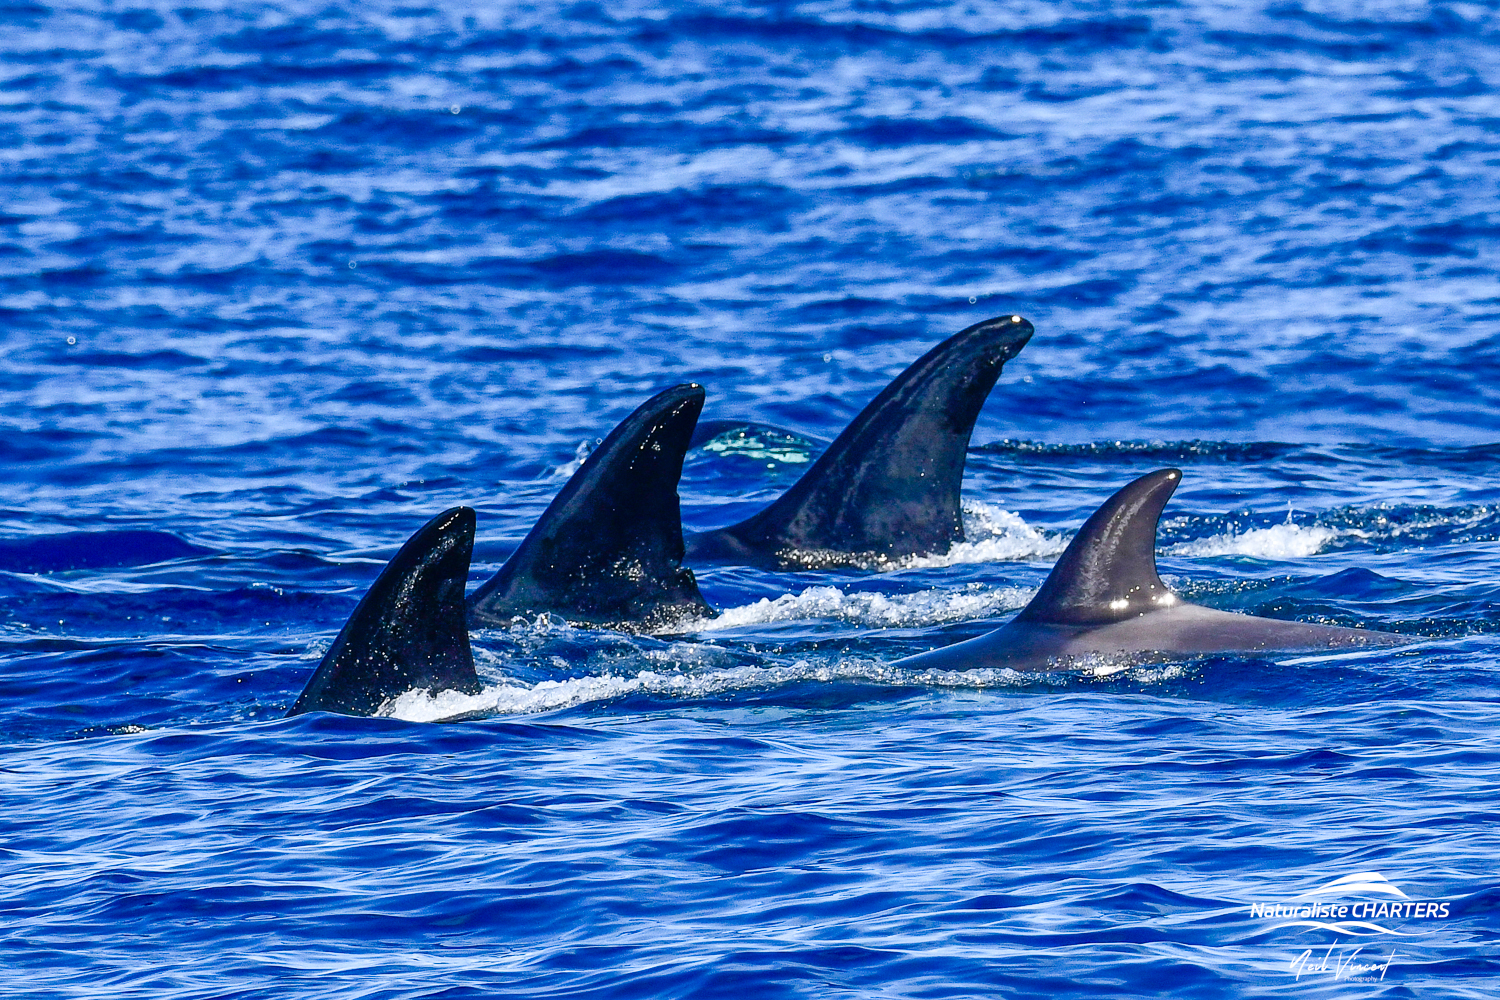 Pods of Orca